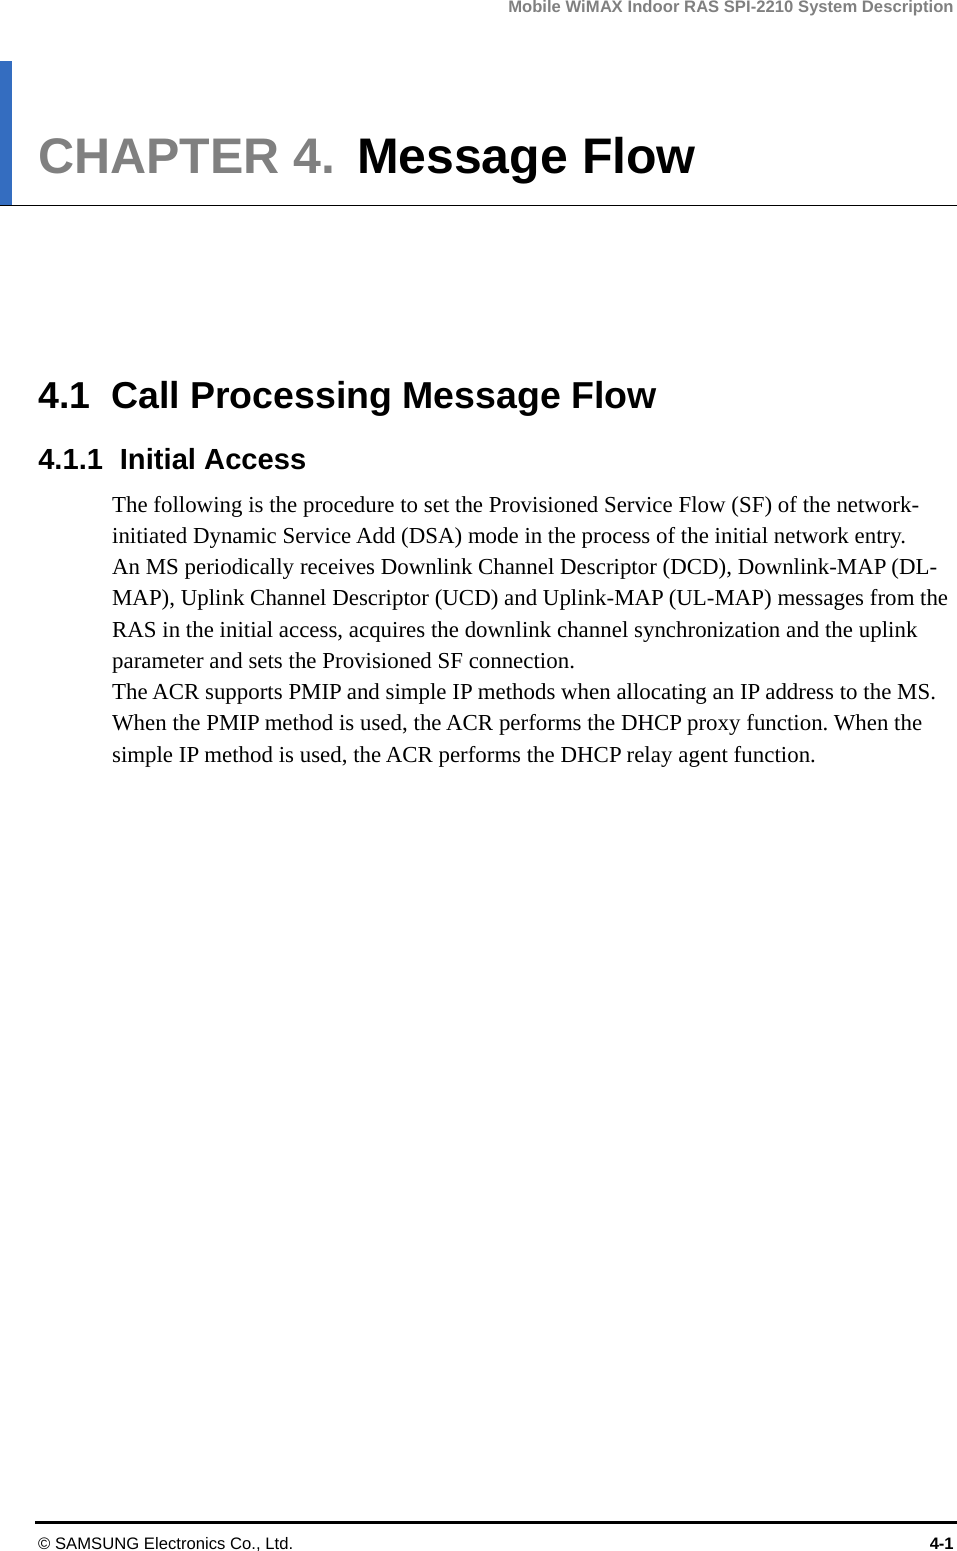 Mobile WiMAX Indoor RAS SPI-2210 System Description © SAMSUNG Electronics Co., Ltd.  4-1 CHAPTER 4.  Message Flow      4.1  Call Processing Message Flow 4.1.1 Initial Access The following is the procedure to set the Provisioned Service Flow (SF) of the network-initiated Dynamic Service Add (DSA) mode in the process of the initial network entry.   An MS periodically receives Downlink Channel Descriptor (DCD), Downlink-MAP (DL-MAP), Uplink Channel Descriptor (UCD) and Uplink-MAP (UL-MAP) messages from the RAS in the initial access, acquires the downlink channel synchronization and the uplink parameter and sets the Provisioned SF connection.   The ACR supports PMIP and simple IP methods when allocating an IP address to the MS. When the PMIP method is used, the ACR performs the DHCP proxy function. When the simple IP method is used, the ACR performs the DHCP relay agent function.  